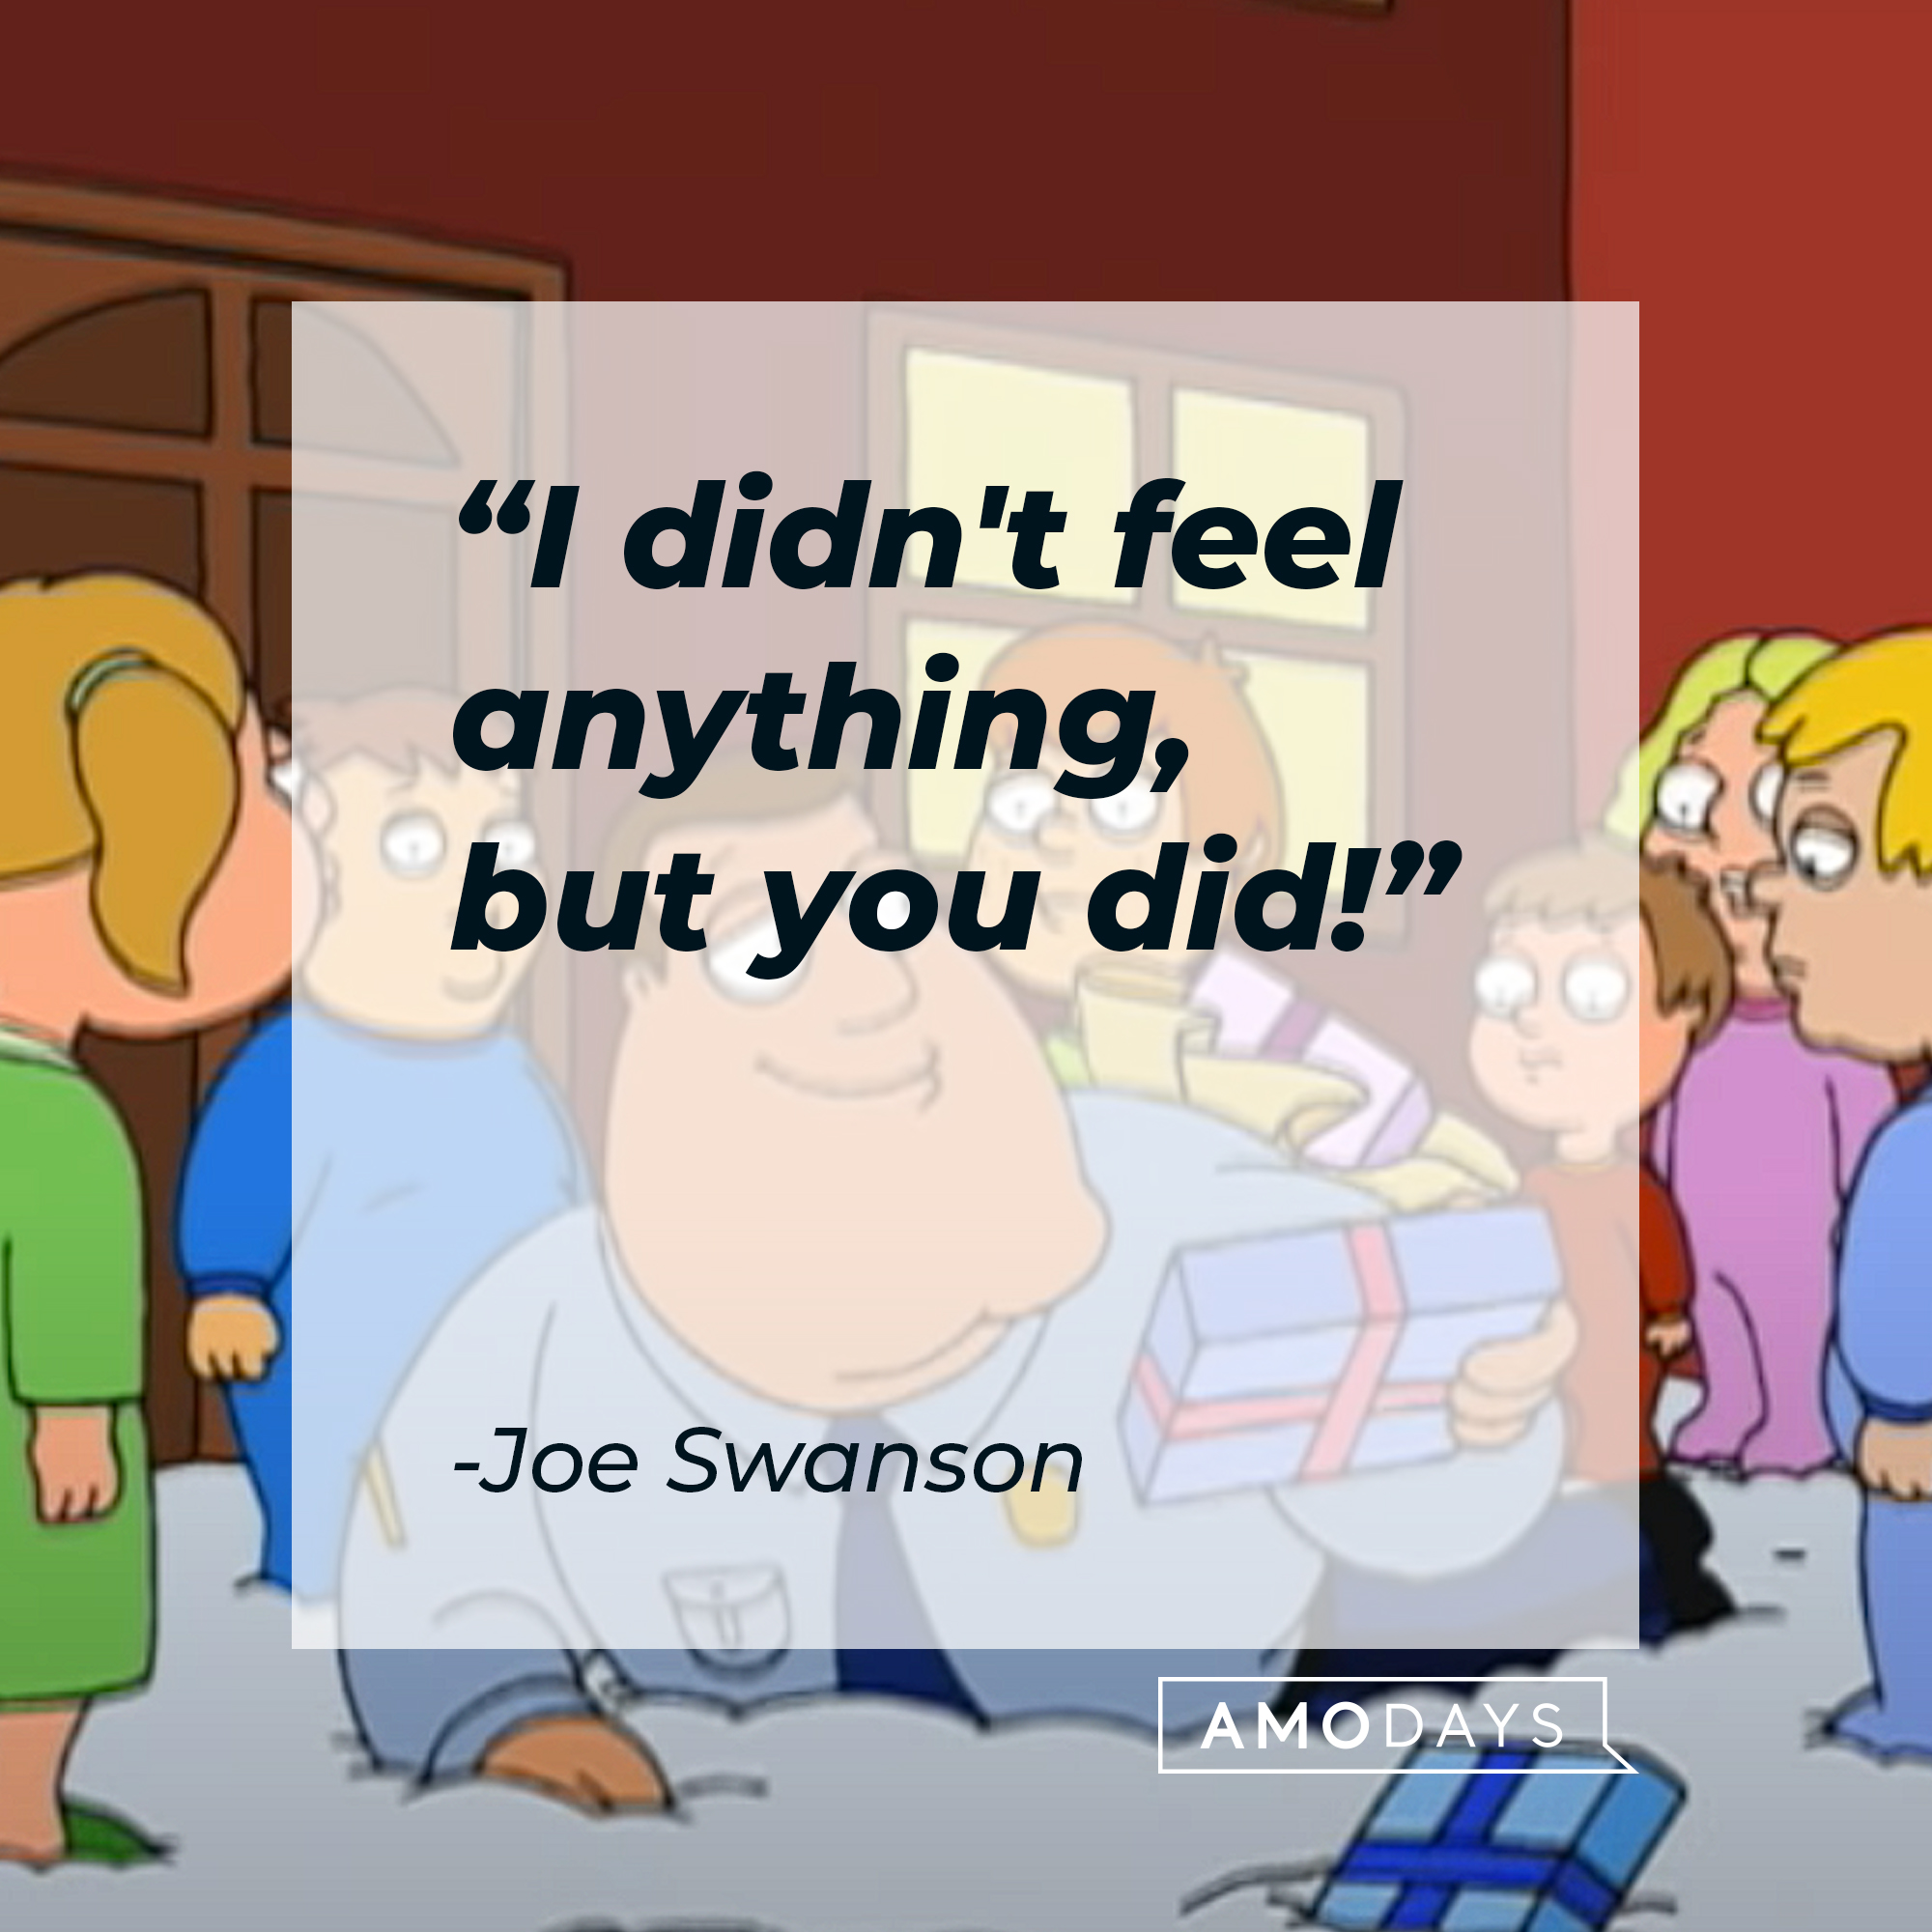 Joe Swanson from "Family Guy" with his quote: "I didn't feel anything, but you did!" | Source: YouTube.com/TBS